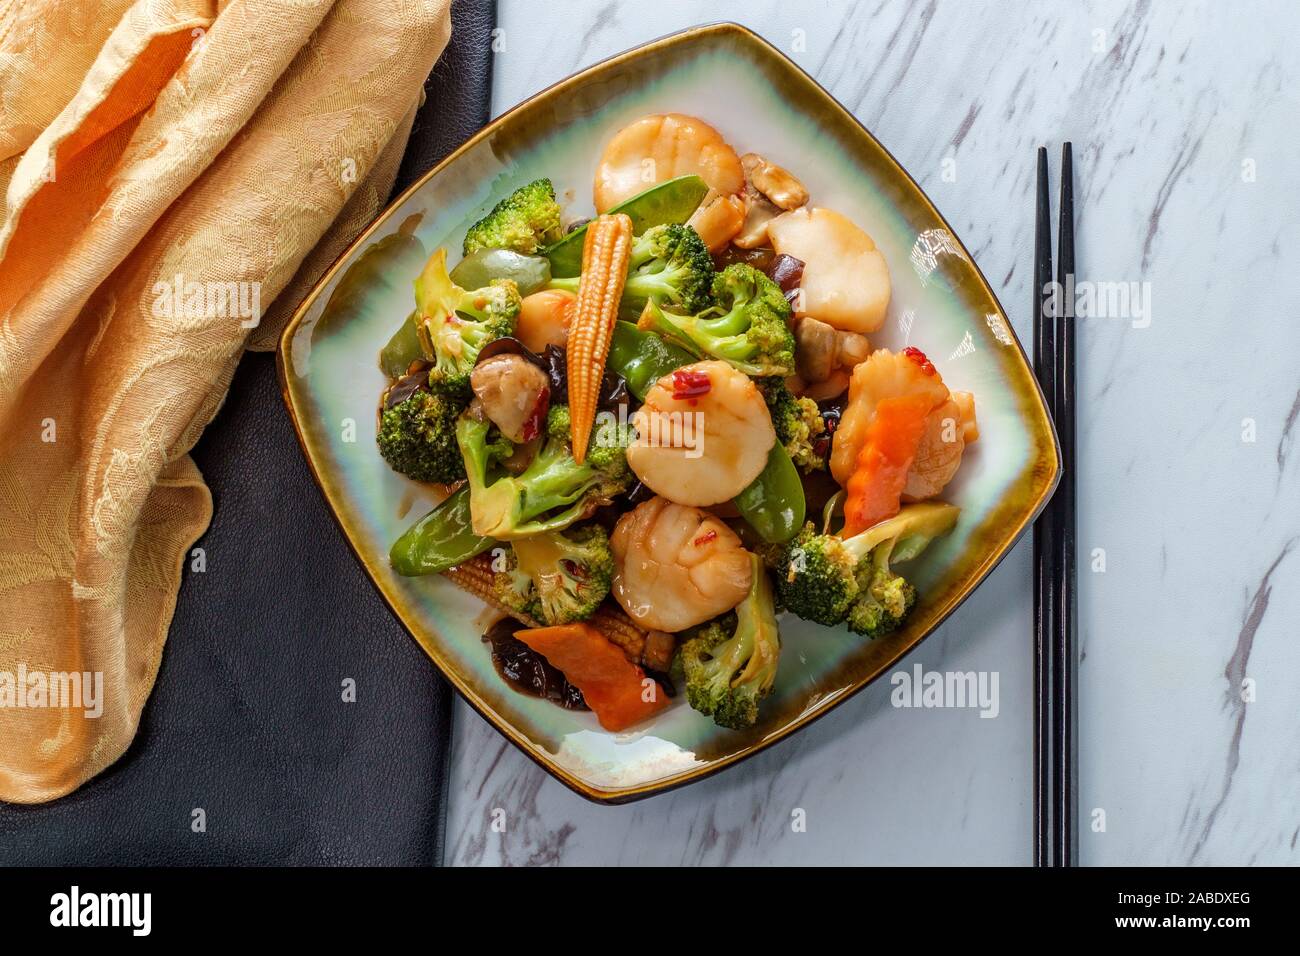 Szechuan stir fried scallops with Chinese Vegetables Stock Photo - Alamy